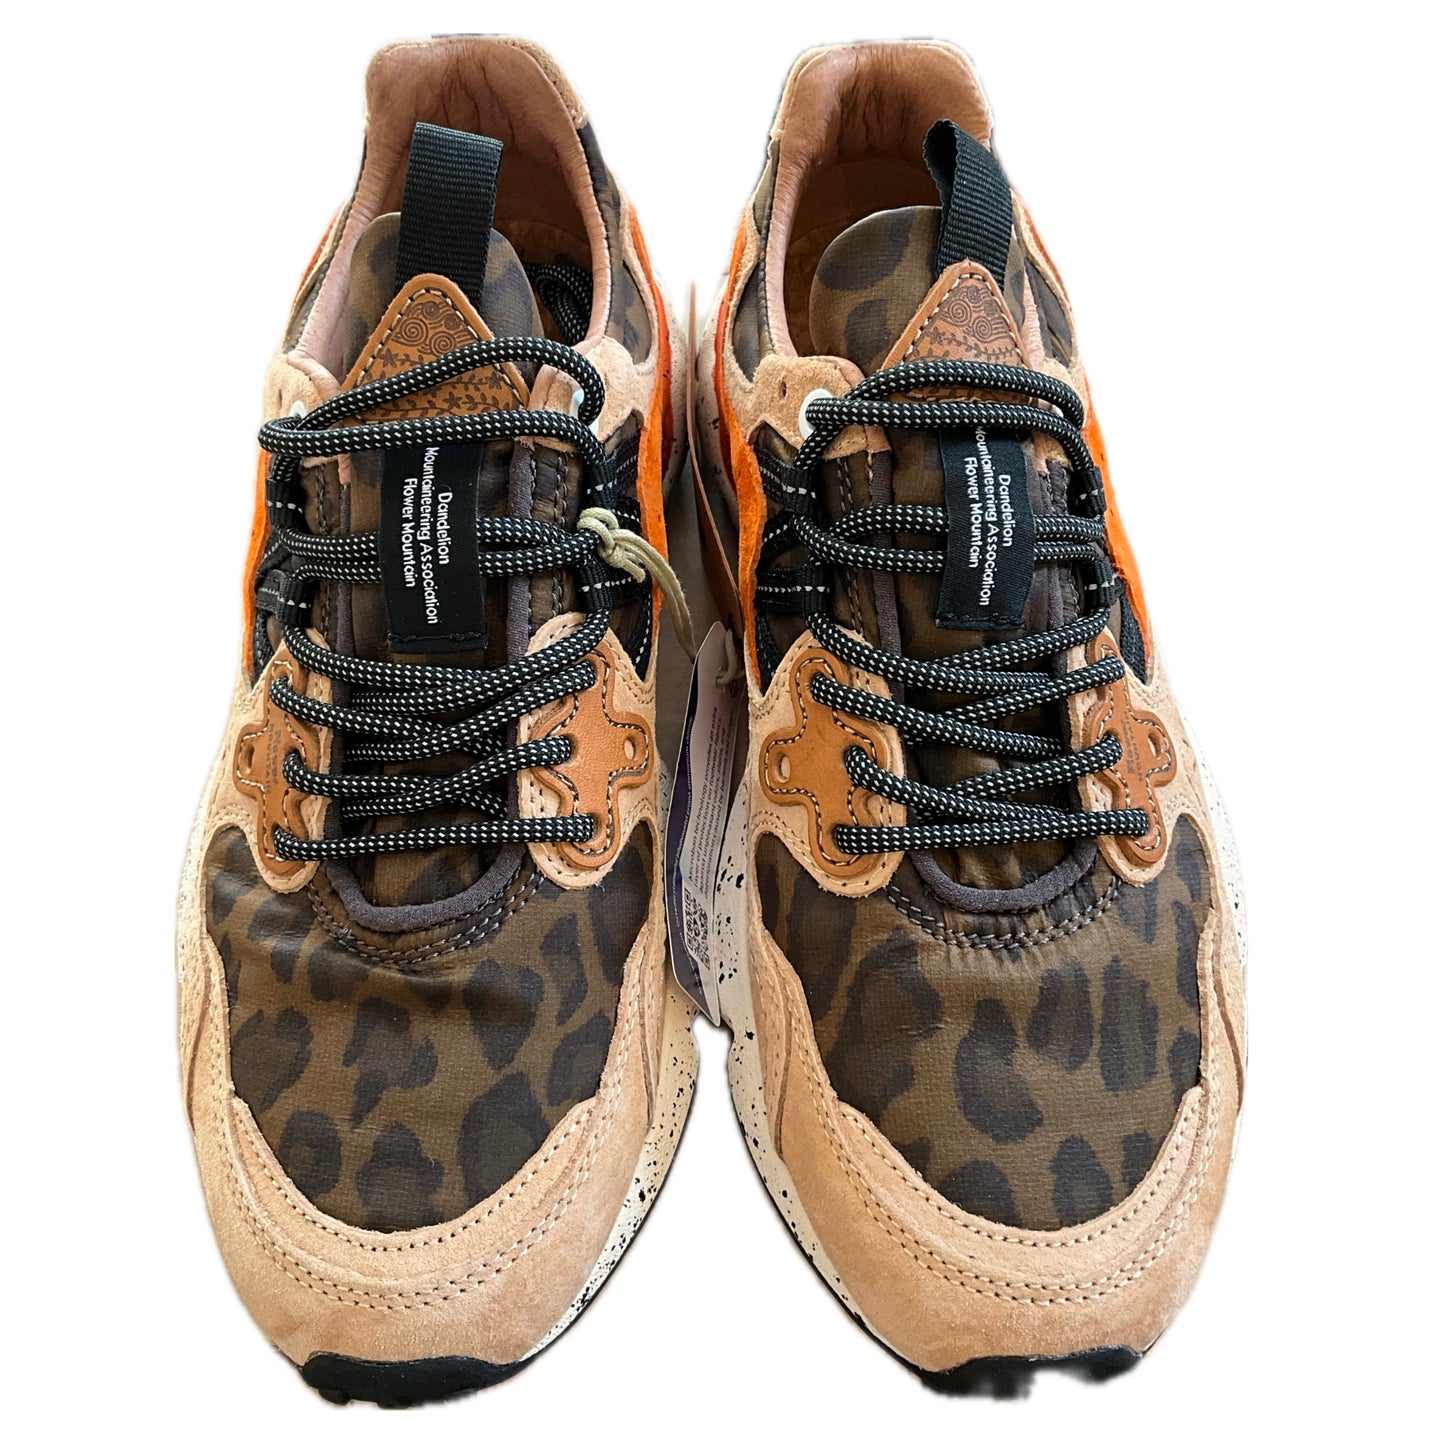 Yamano Uni 3 -Suede and technical fabric sneakers - Leopard Brown-Beige